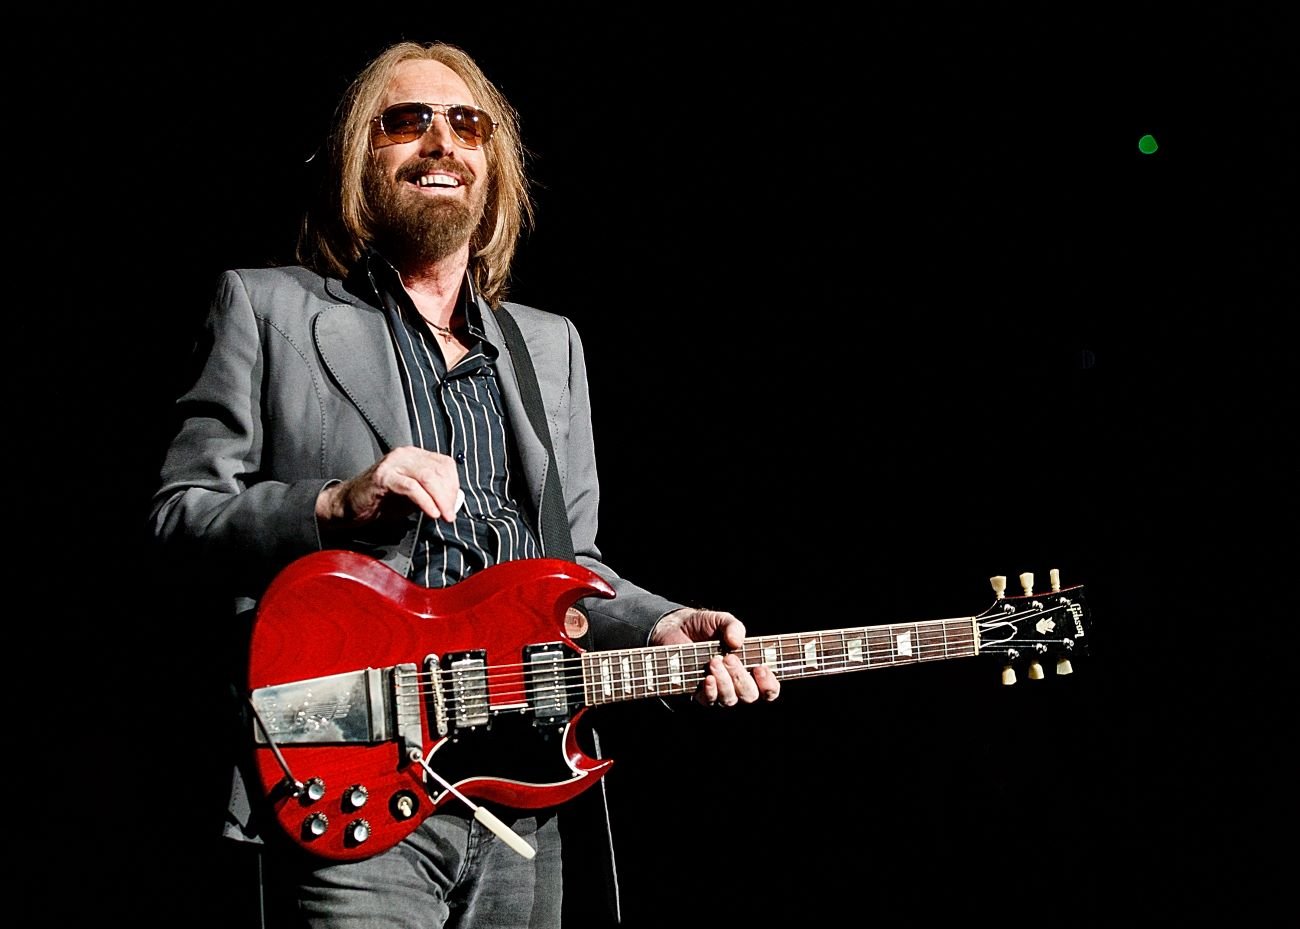 Tom Petty Said He Became Bandleader on Accident: ‘I Still Don’t Want the Job’ 